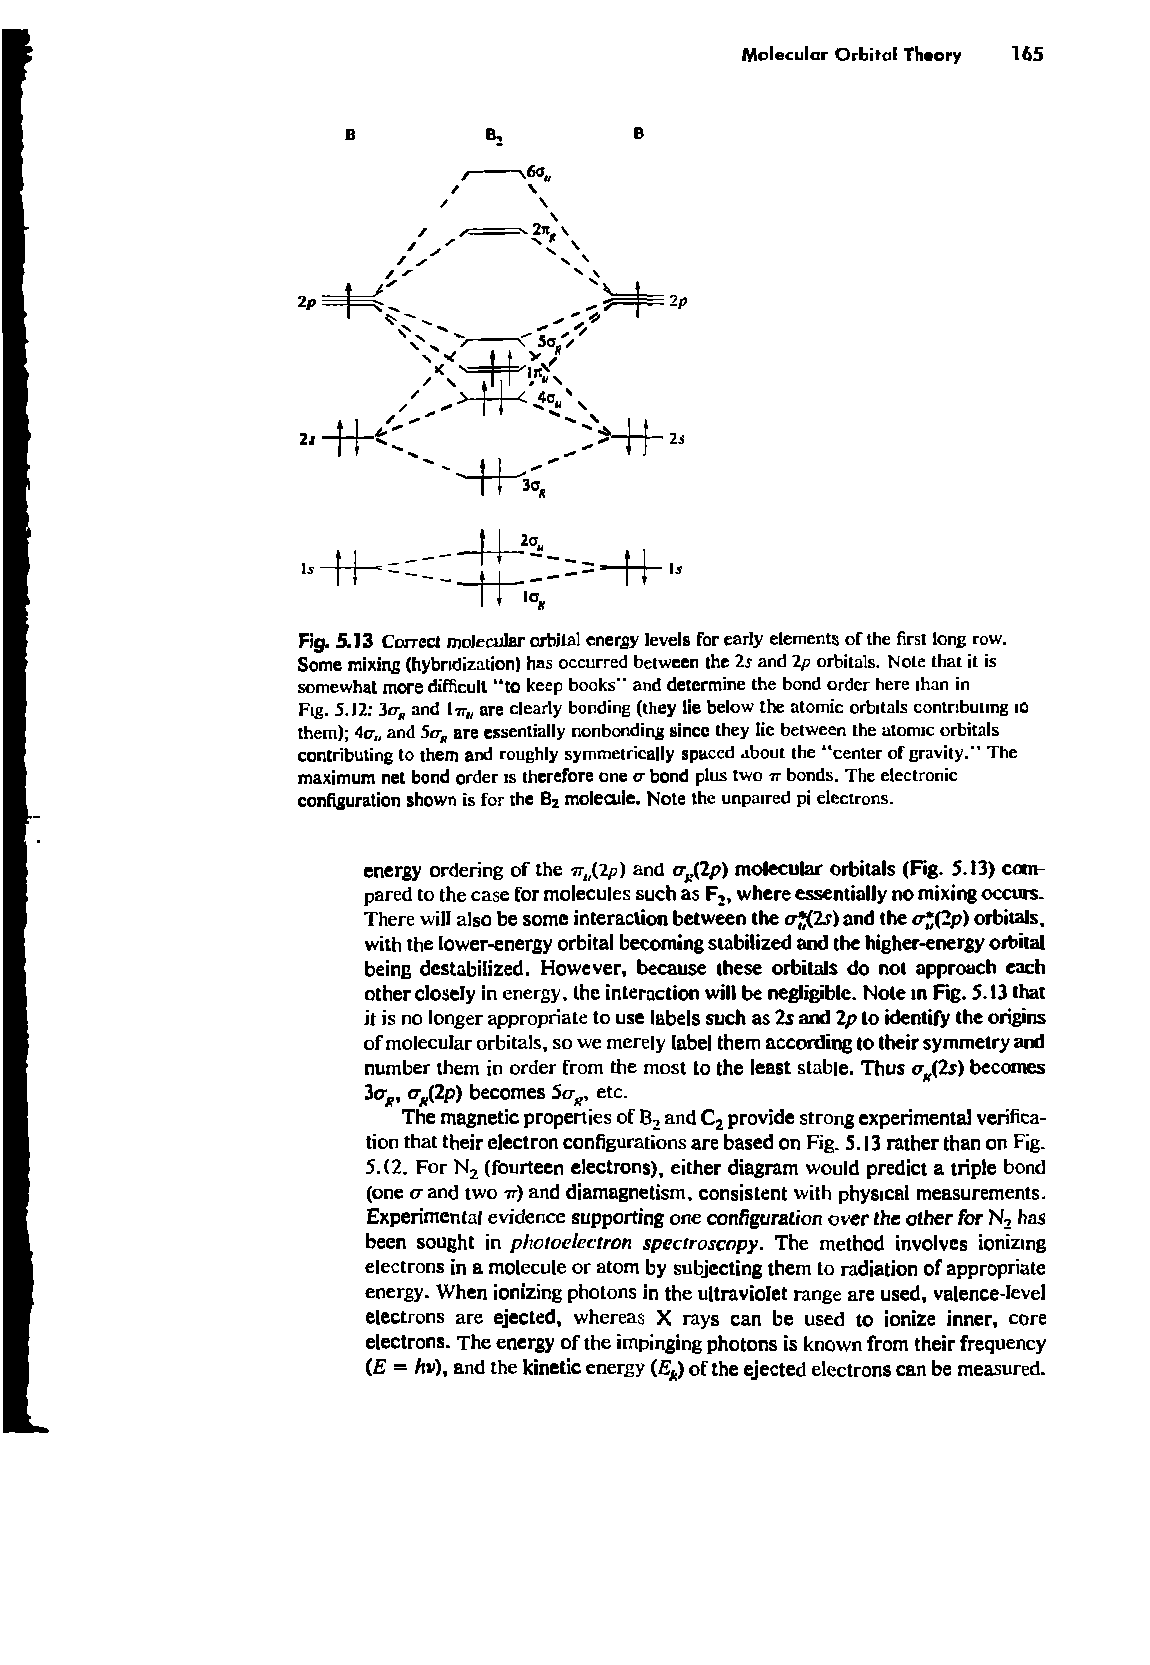 Fig. 5.13 Correct molecular orbital energy levels For early elements of the first long row. Some mixing (hybridization) has occurred between the 2r and 2p orbitals. Note that it is somewhat more difficult to keep books" and determine the bond order here ihan in Fig. 5.12 3o- and are clearly bonding (they lie below the atomic orbitals contributing i0 them) 4(7, and 5trR are essentially nonbonding since they lie between the atomic orbitals contributing to them and roughly symmetrically spaced about the center of gravity." The maximum net bond order is therefore one cr bond plus two 7r bonds. The electronic configuration shown is for the Bz molecule. Note the unpaired pi electrons.